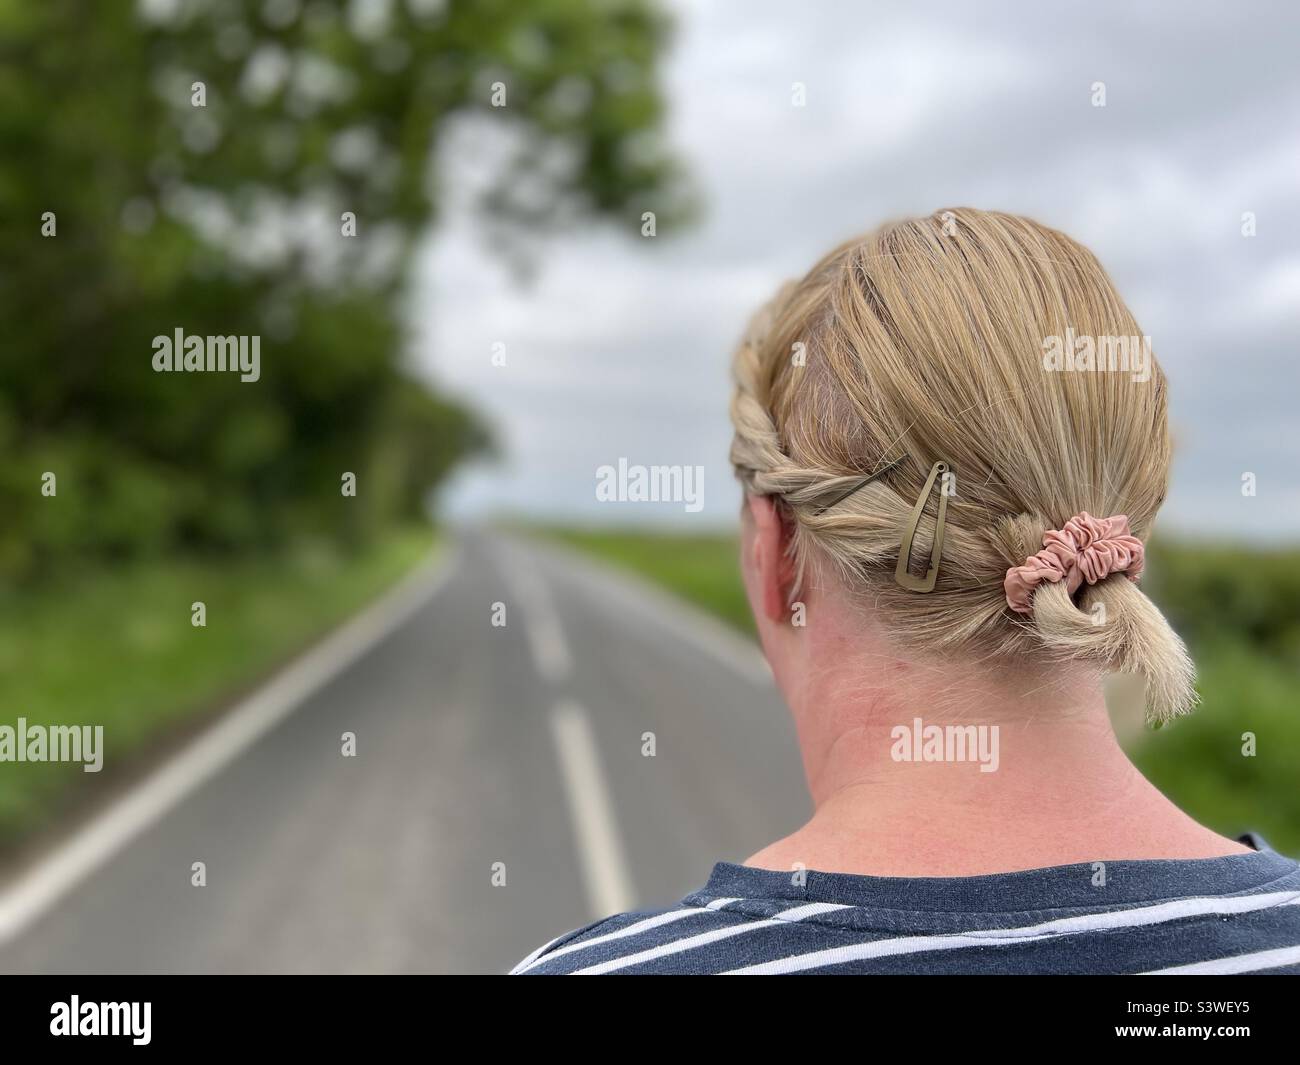 Rear view of woman with braided hair Stock Photo